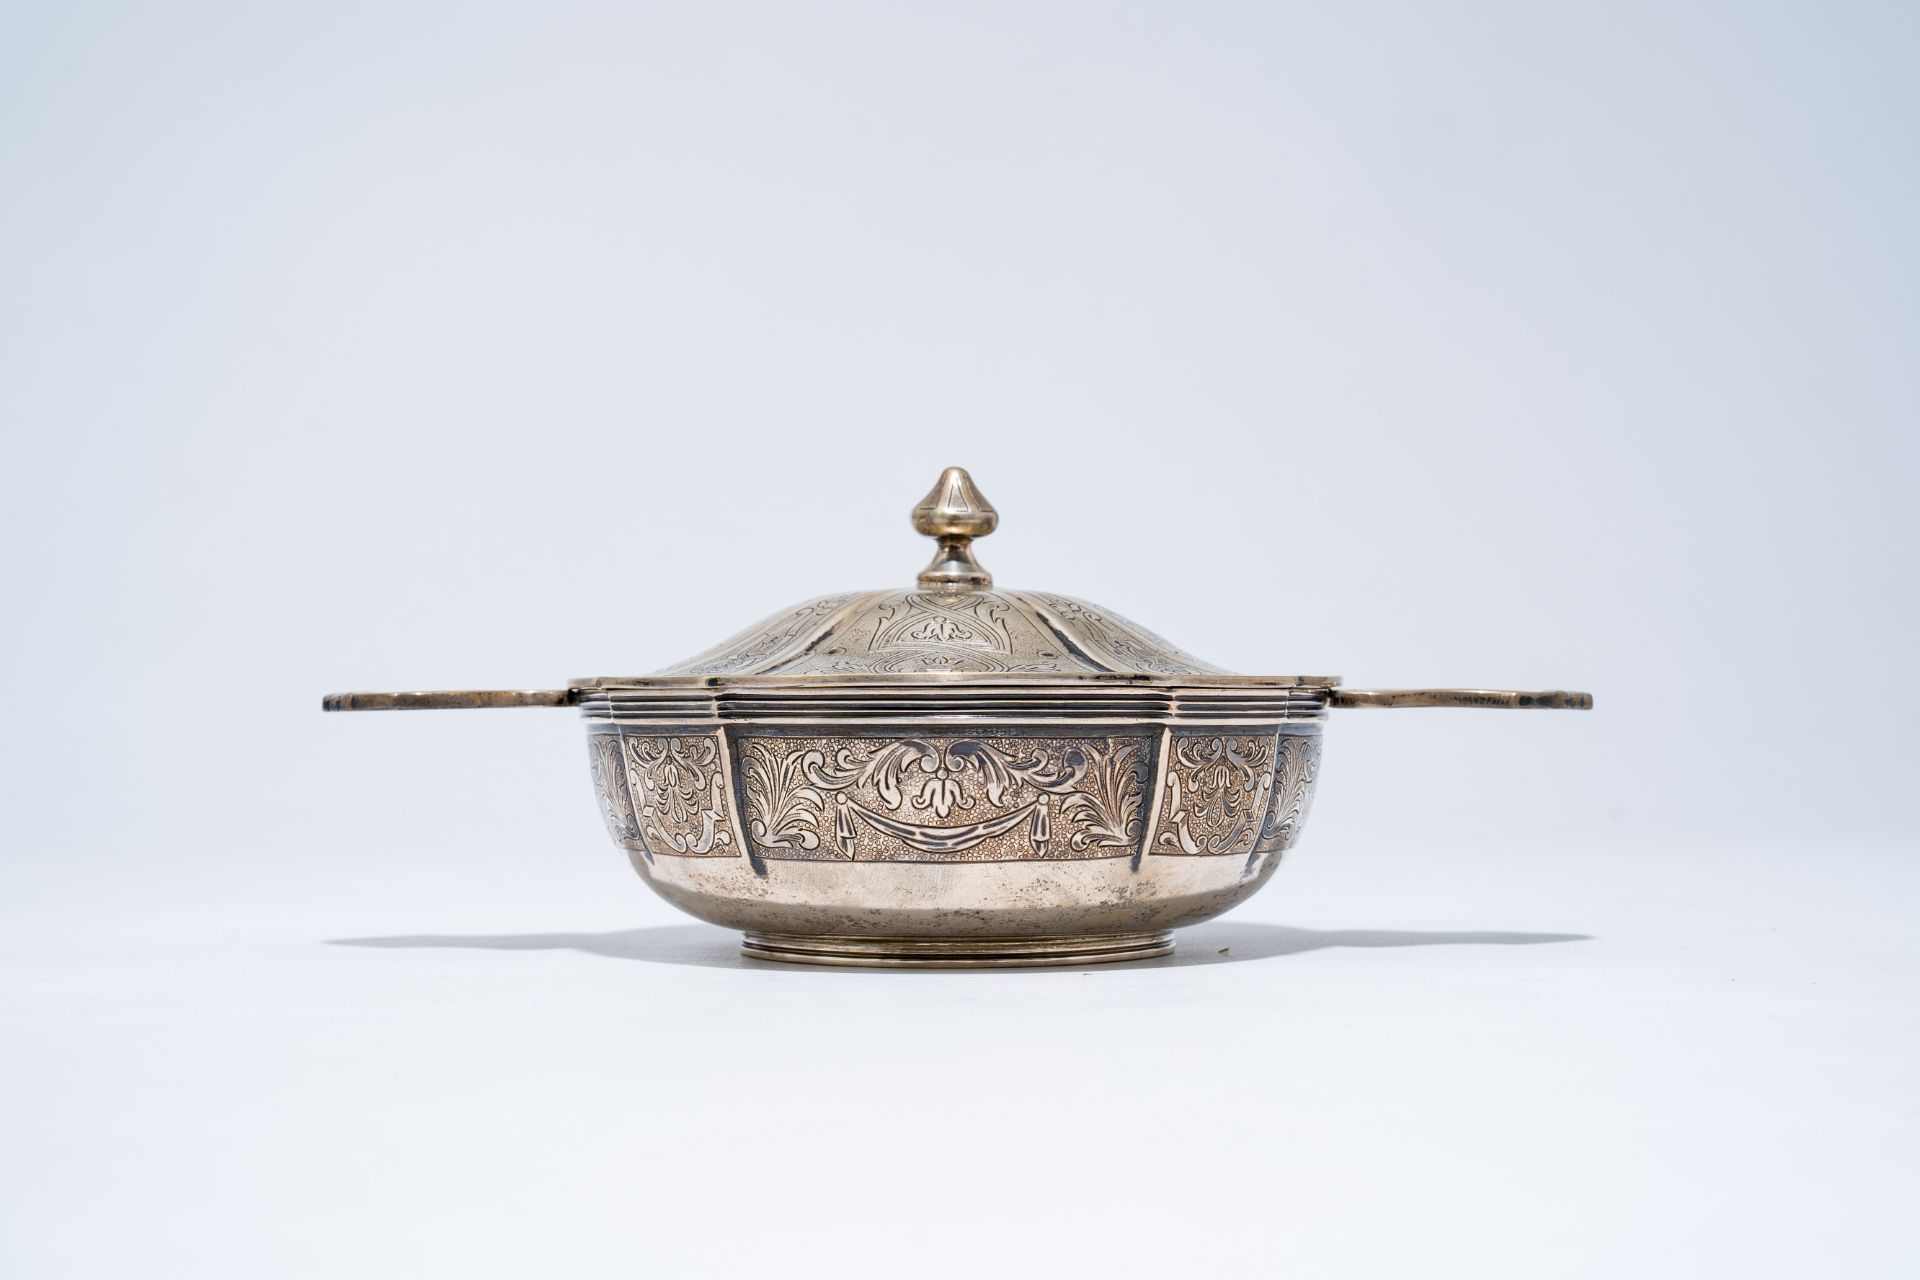 A Belgian silver bowl and cover with floral design, maker's mark Wolfers, 800/000, 20th C. - Image 3 of 9